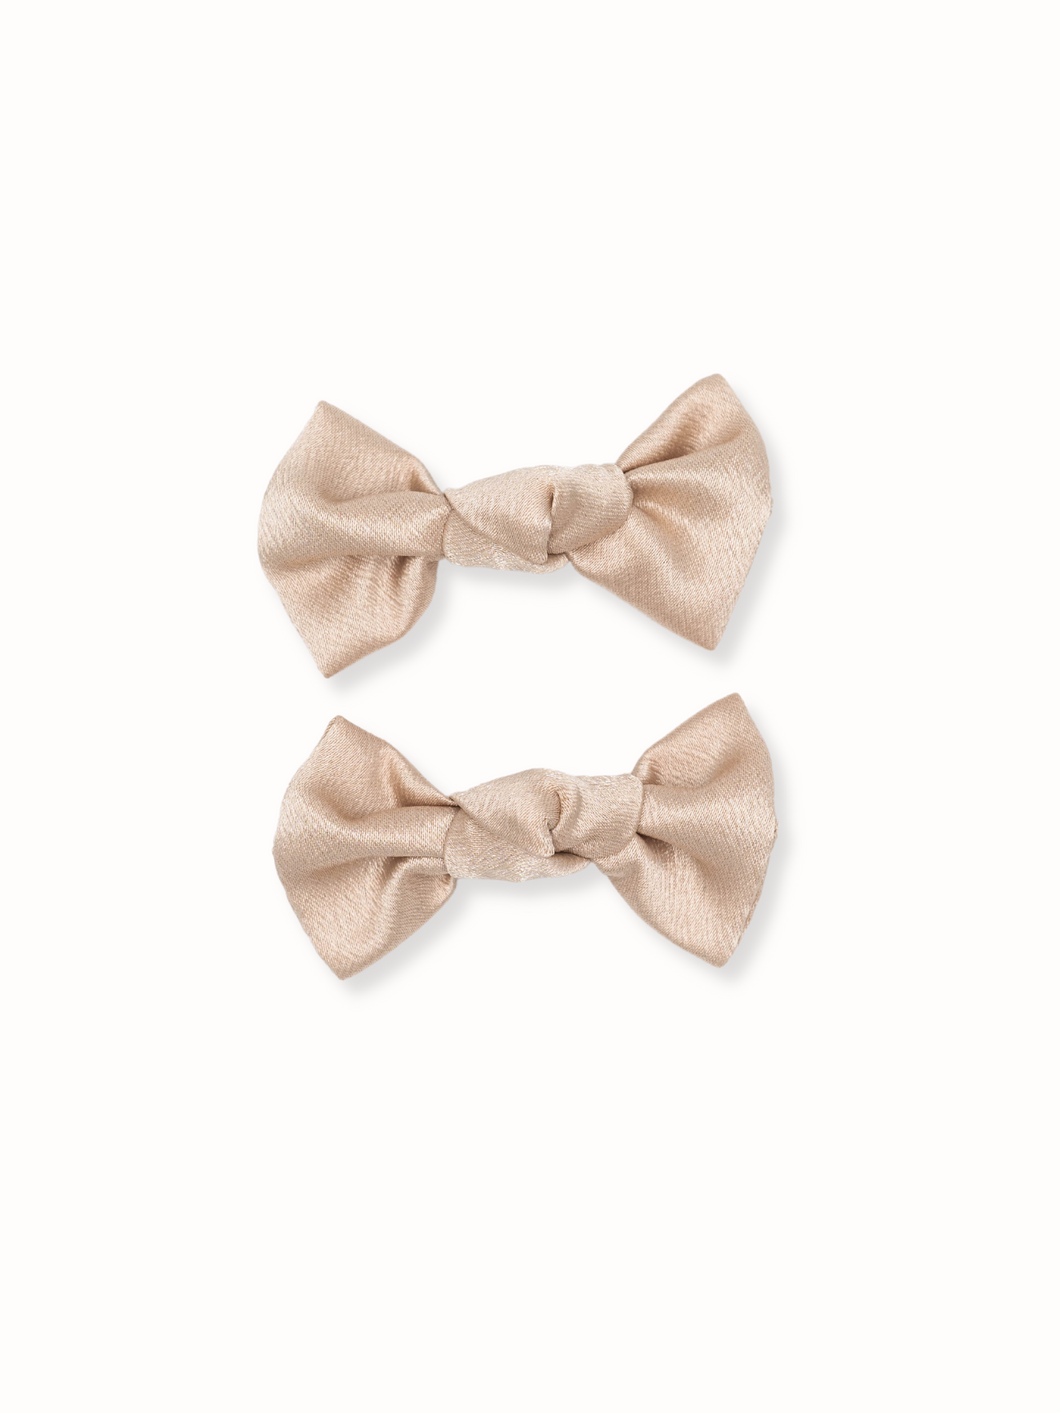 Reese Gold Satin Knotted Mini Bow ( 2 Piece Set )